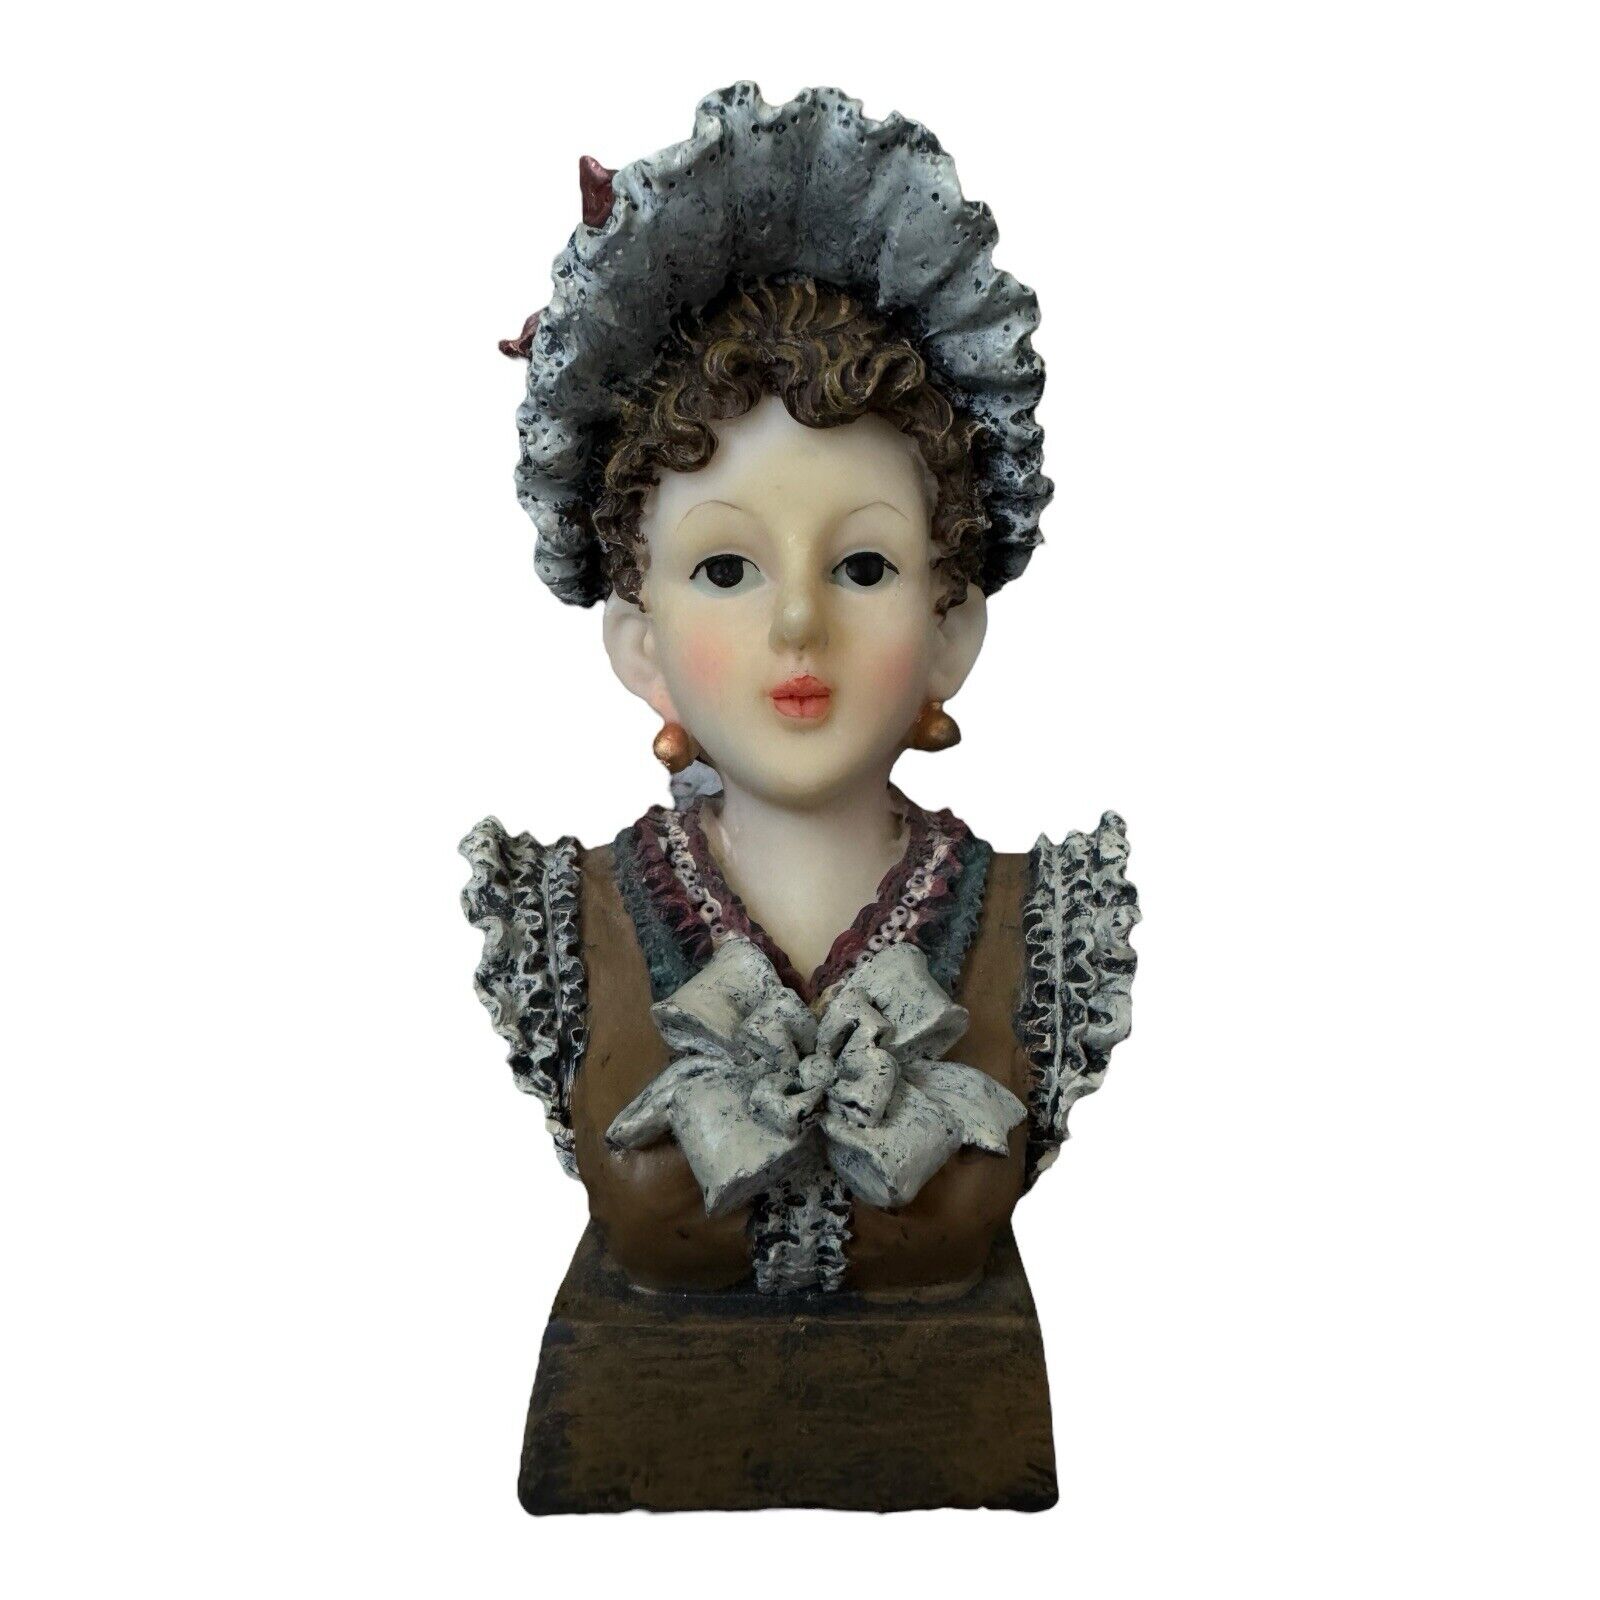 Vintage Lady Bust Figurine - Victorian Style Collectible Figurine